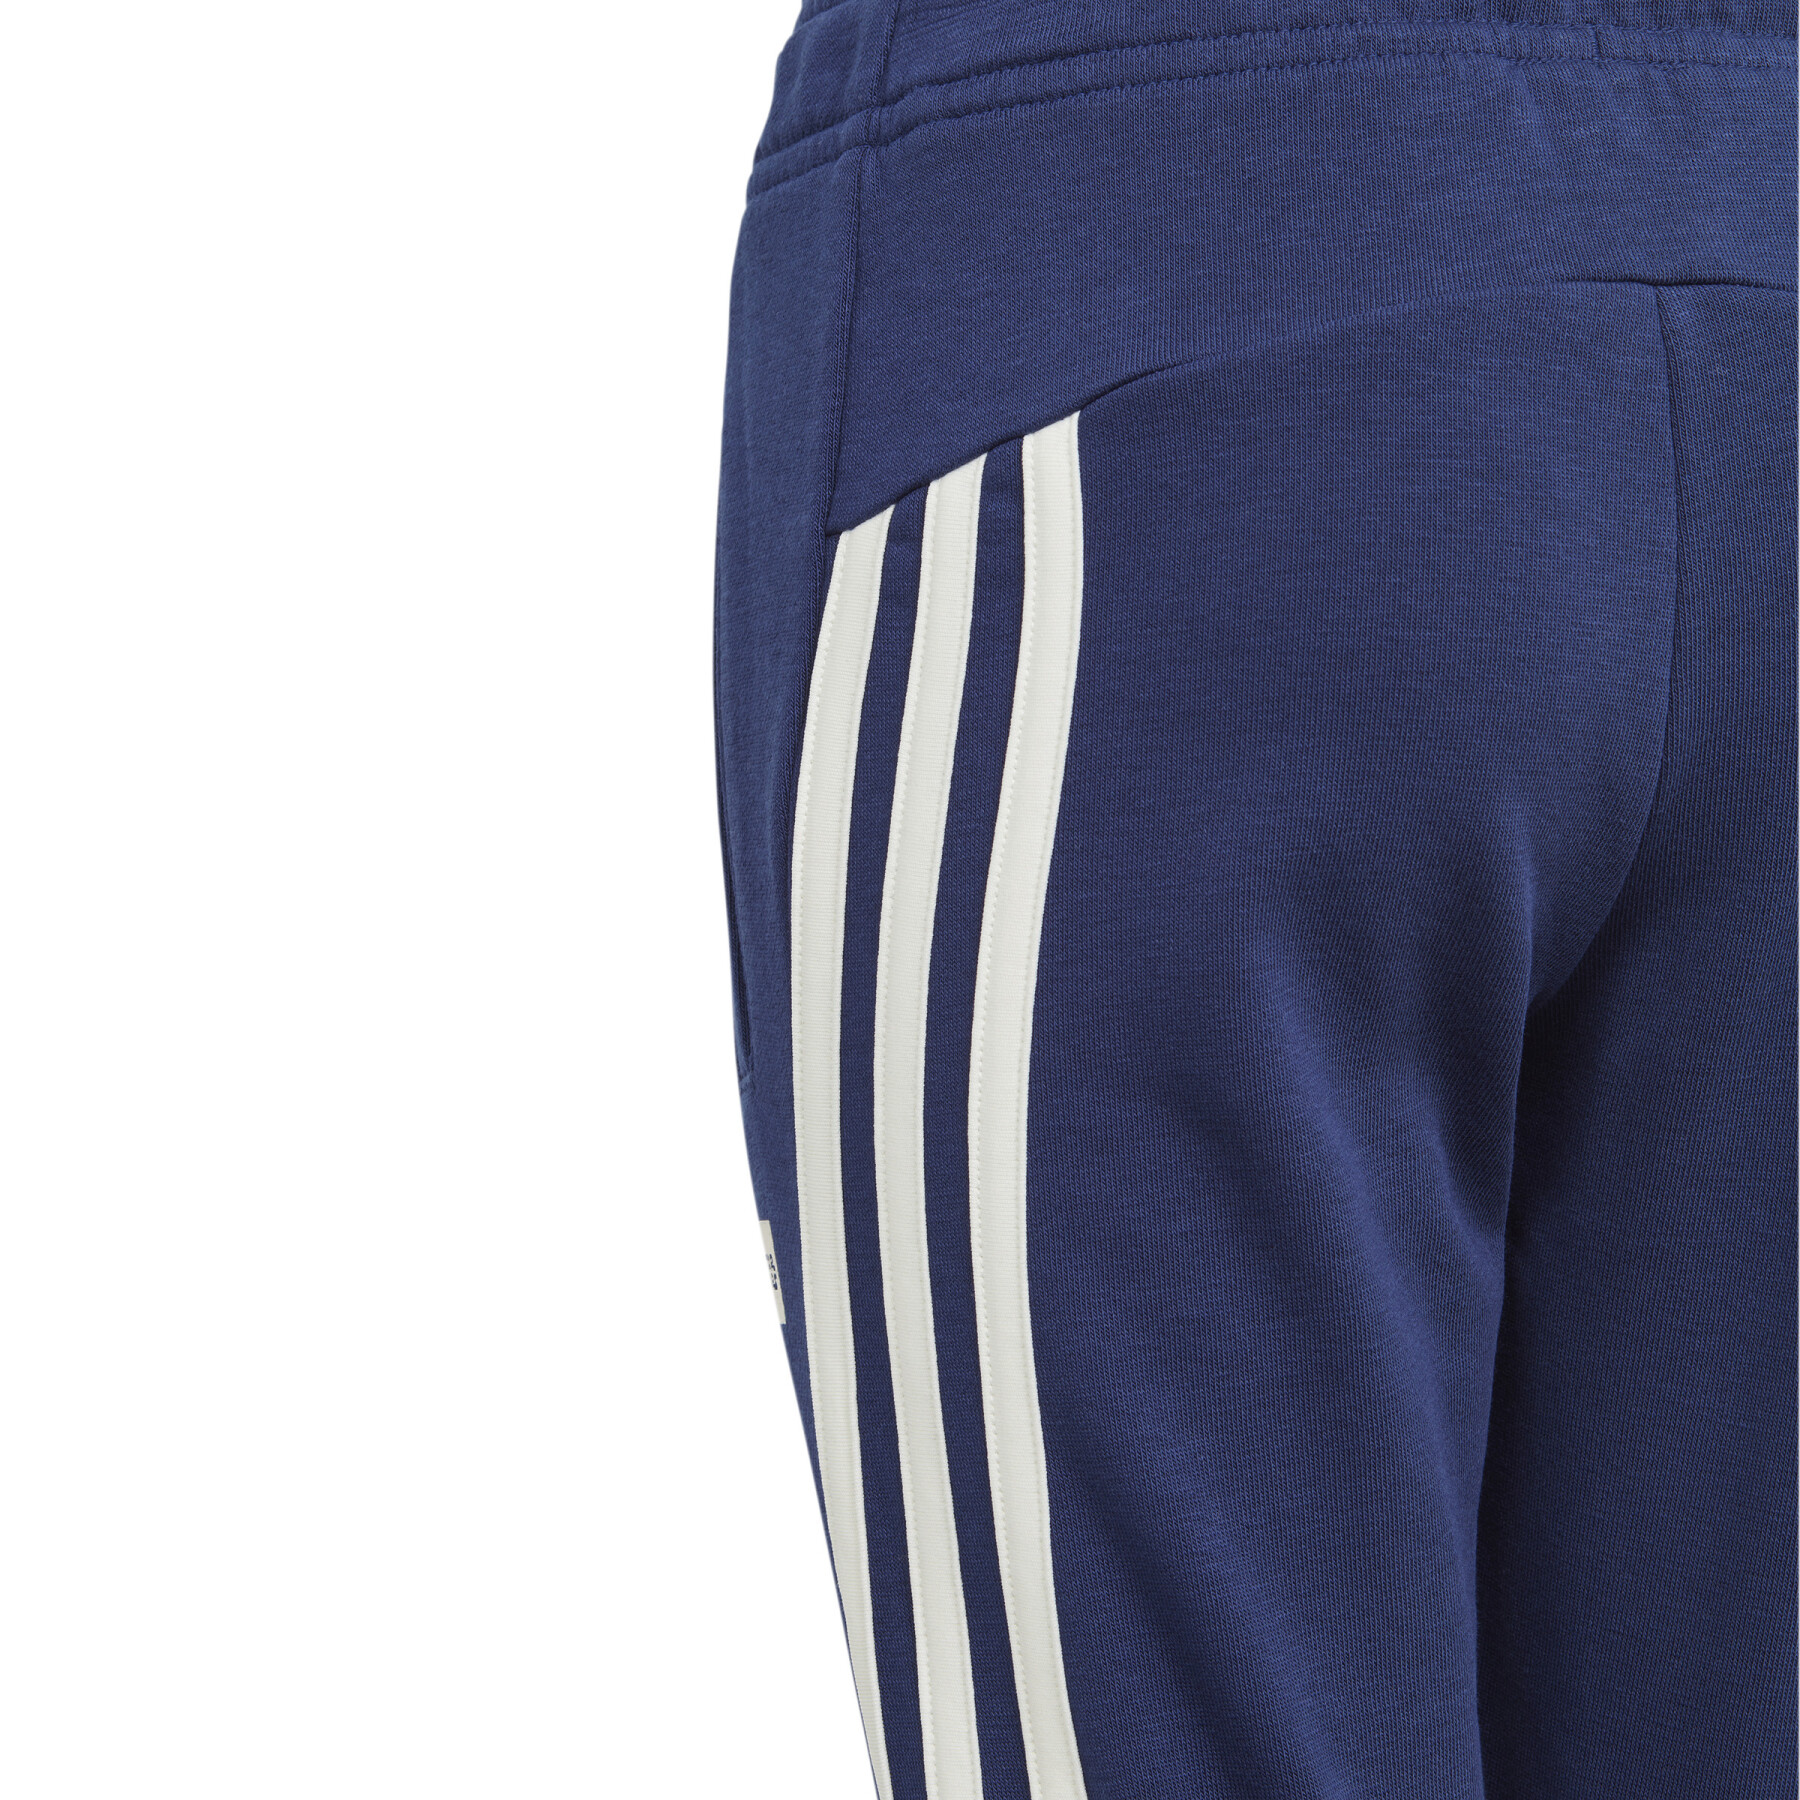 Children's jogging suit adidas Star Wars Young Jedi